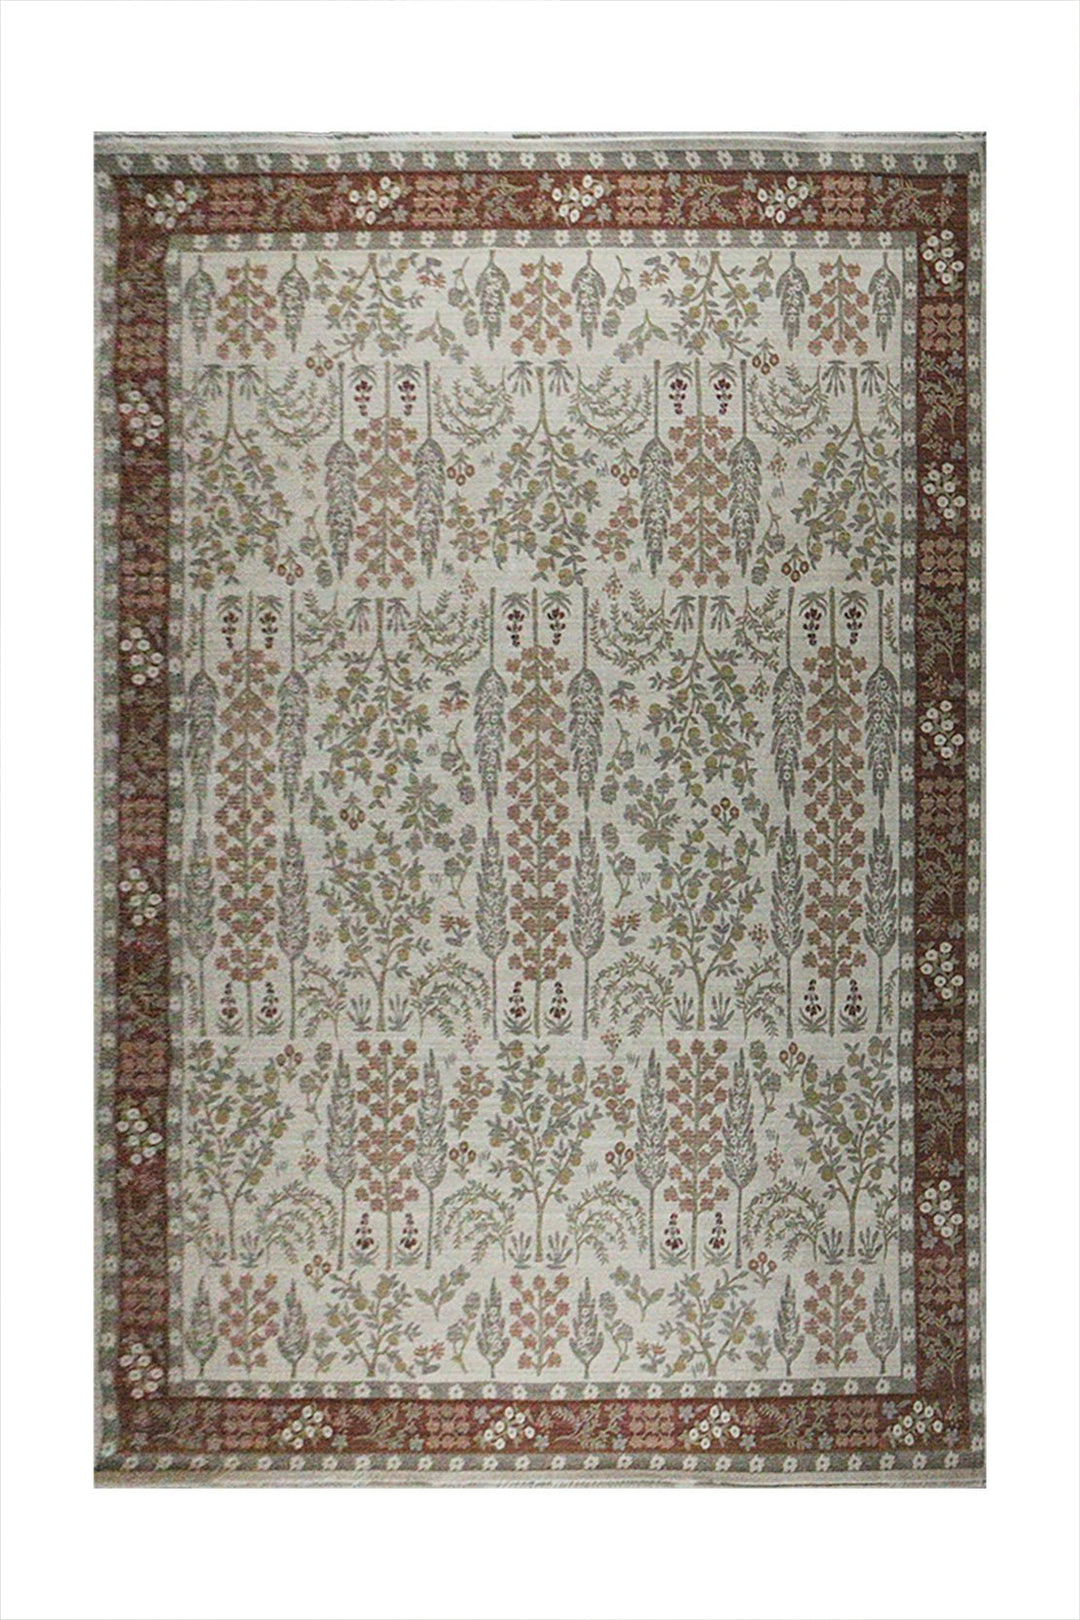 Turkish Modern Festival Plus Rug - Beige - 7.8 x 10.1 FT - Sleek And Minimalist For Chic Interiors - V Surfaces